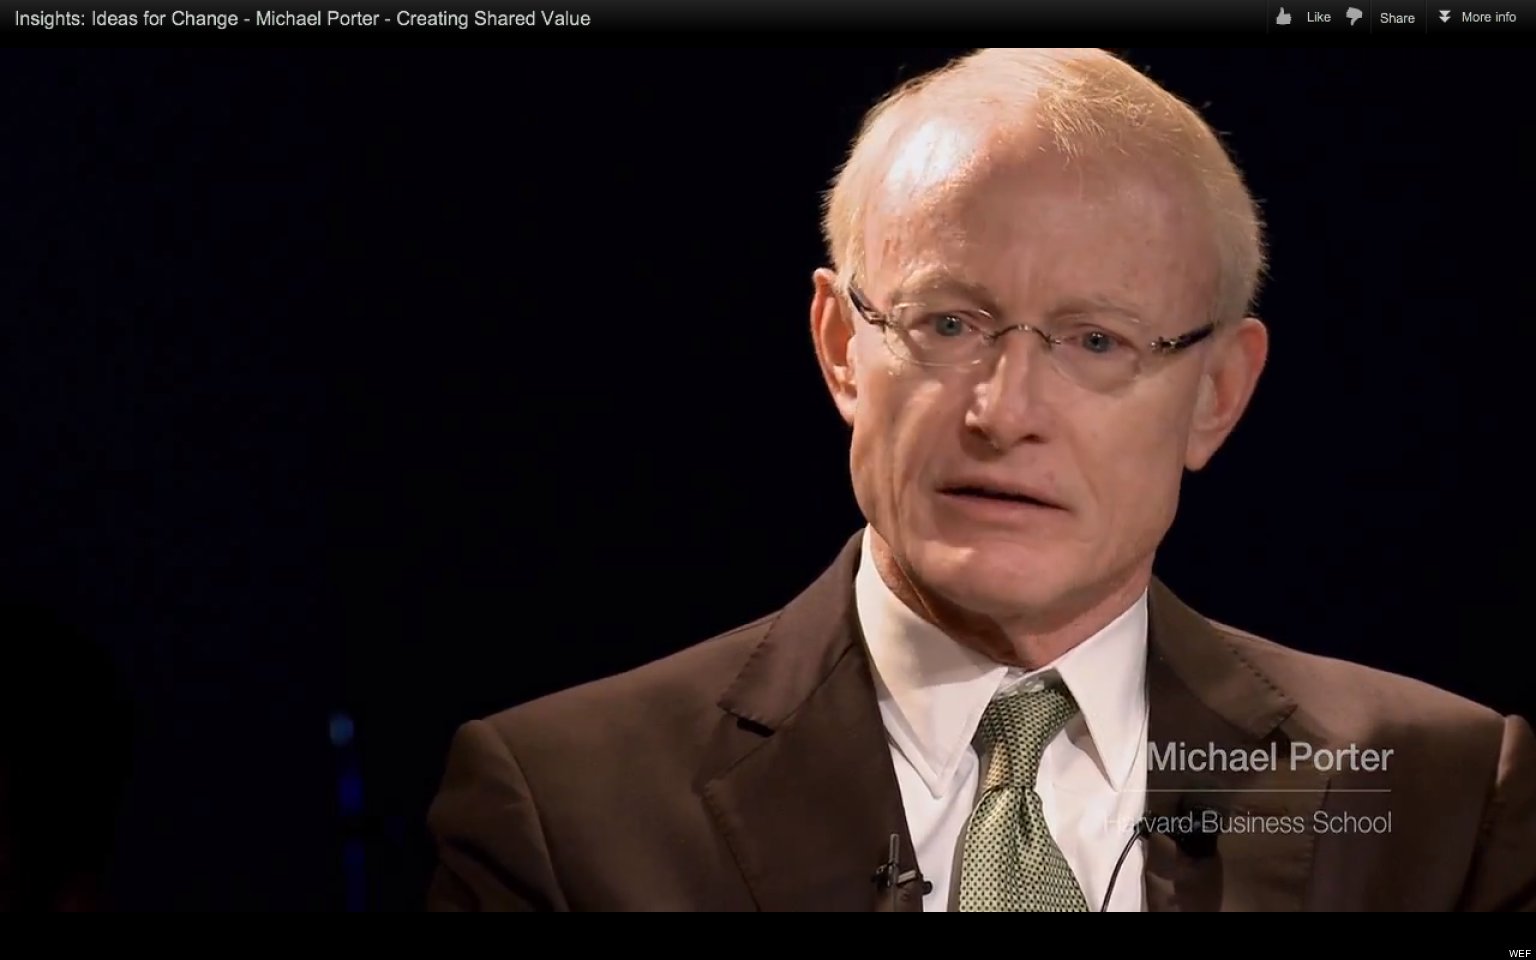 Michael Porter On Creating Shared Value (VIDEO)1536 x 960